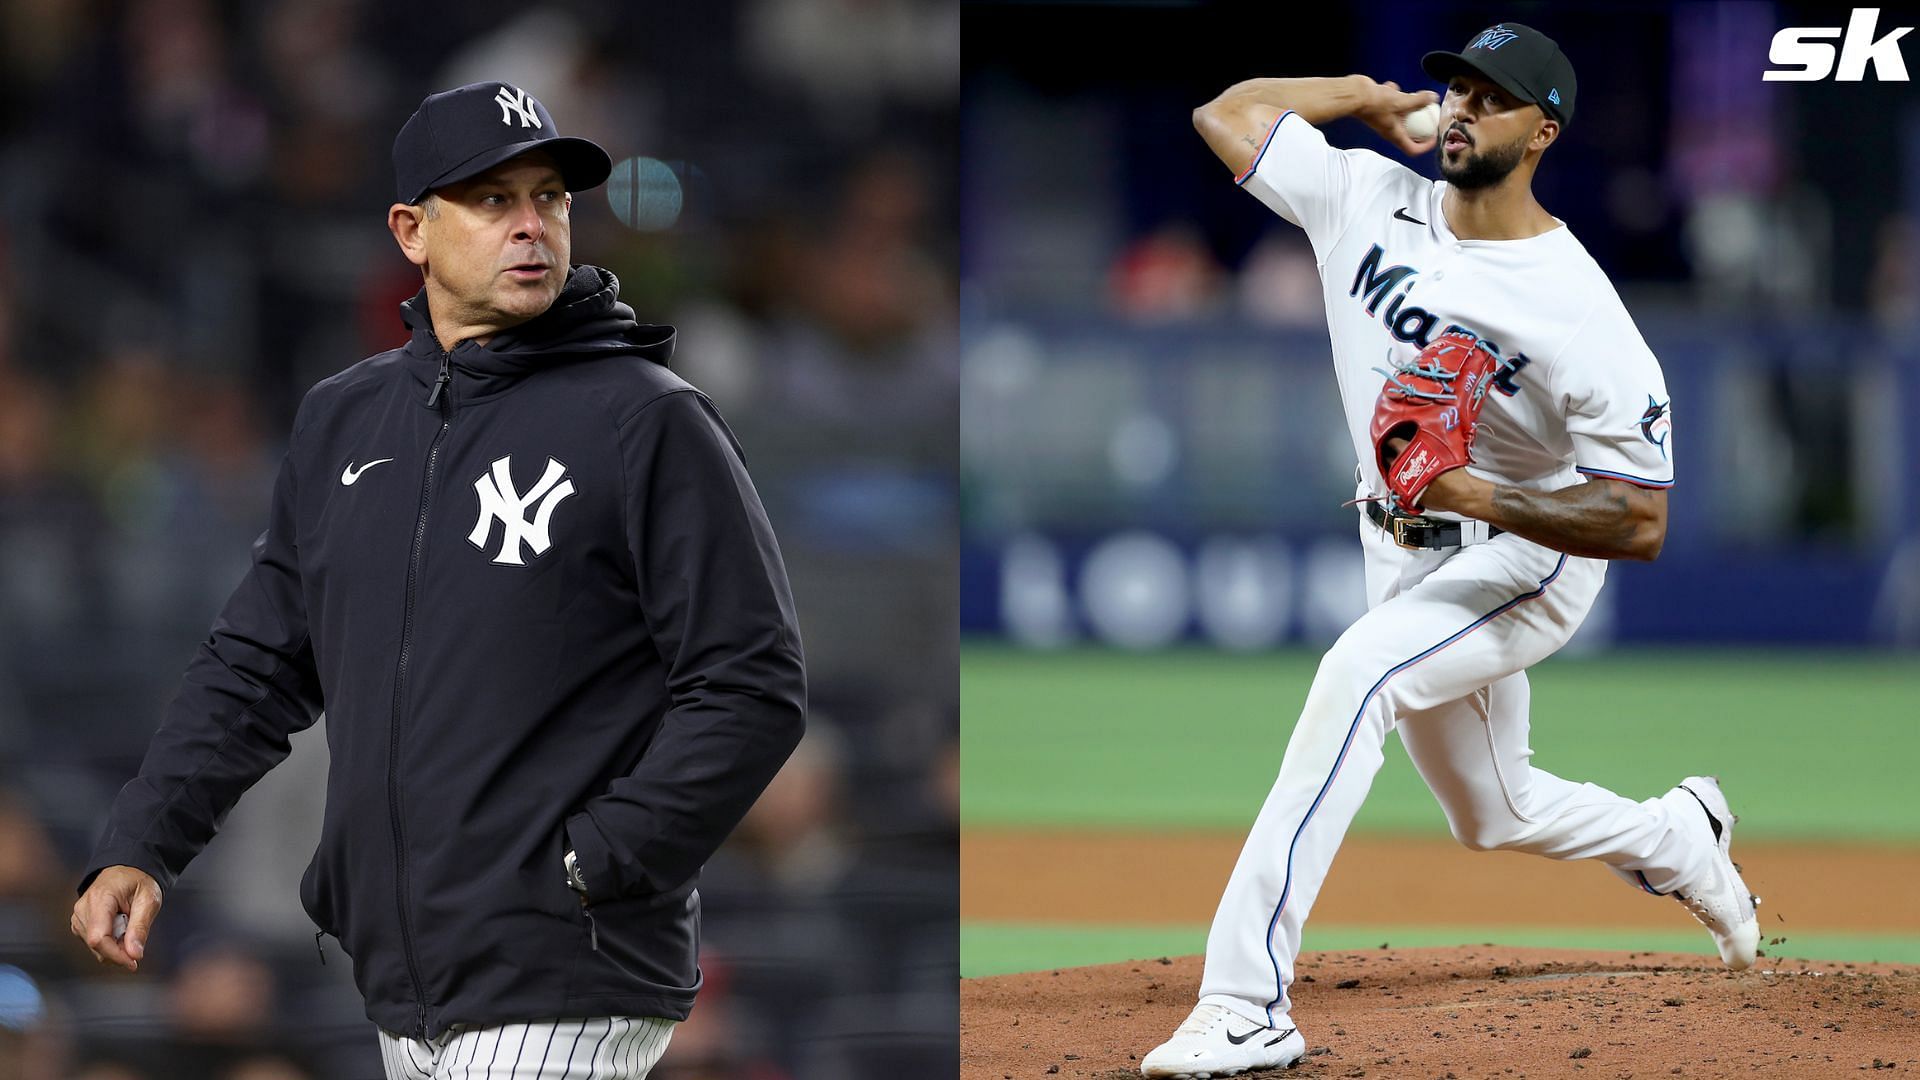 Aaron Boone of the New York Yankees and Sandy Alcantara of the Miami Marlins